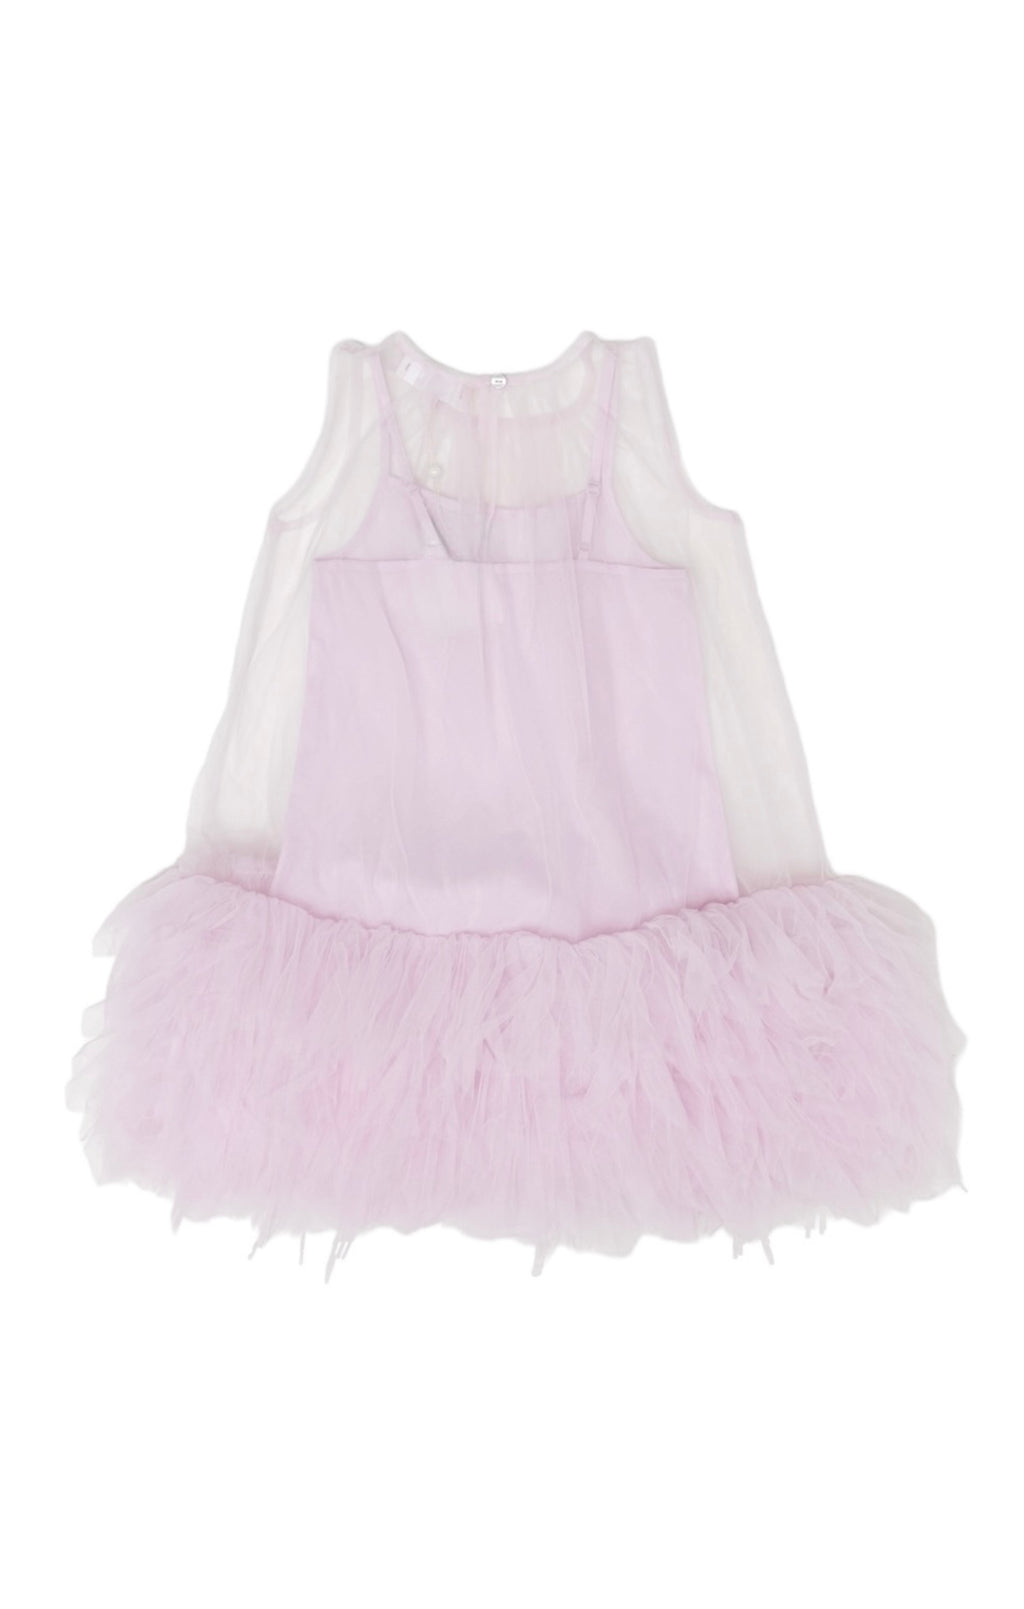 TUTU DU MONDE (NEW) with tags Dress Size: 6-7 Years